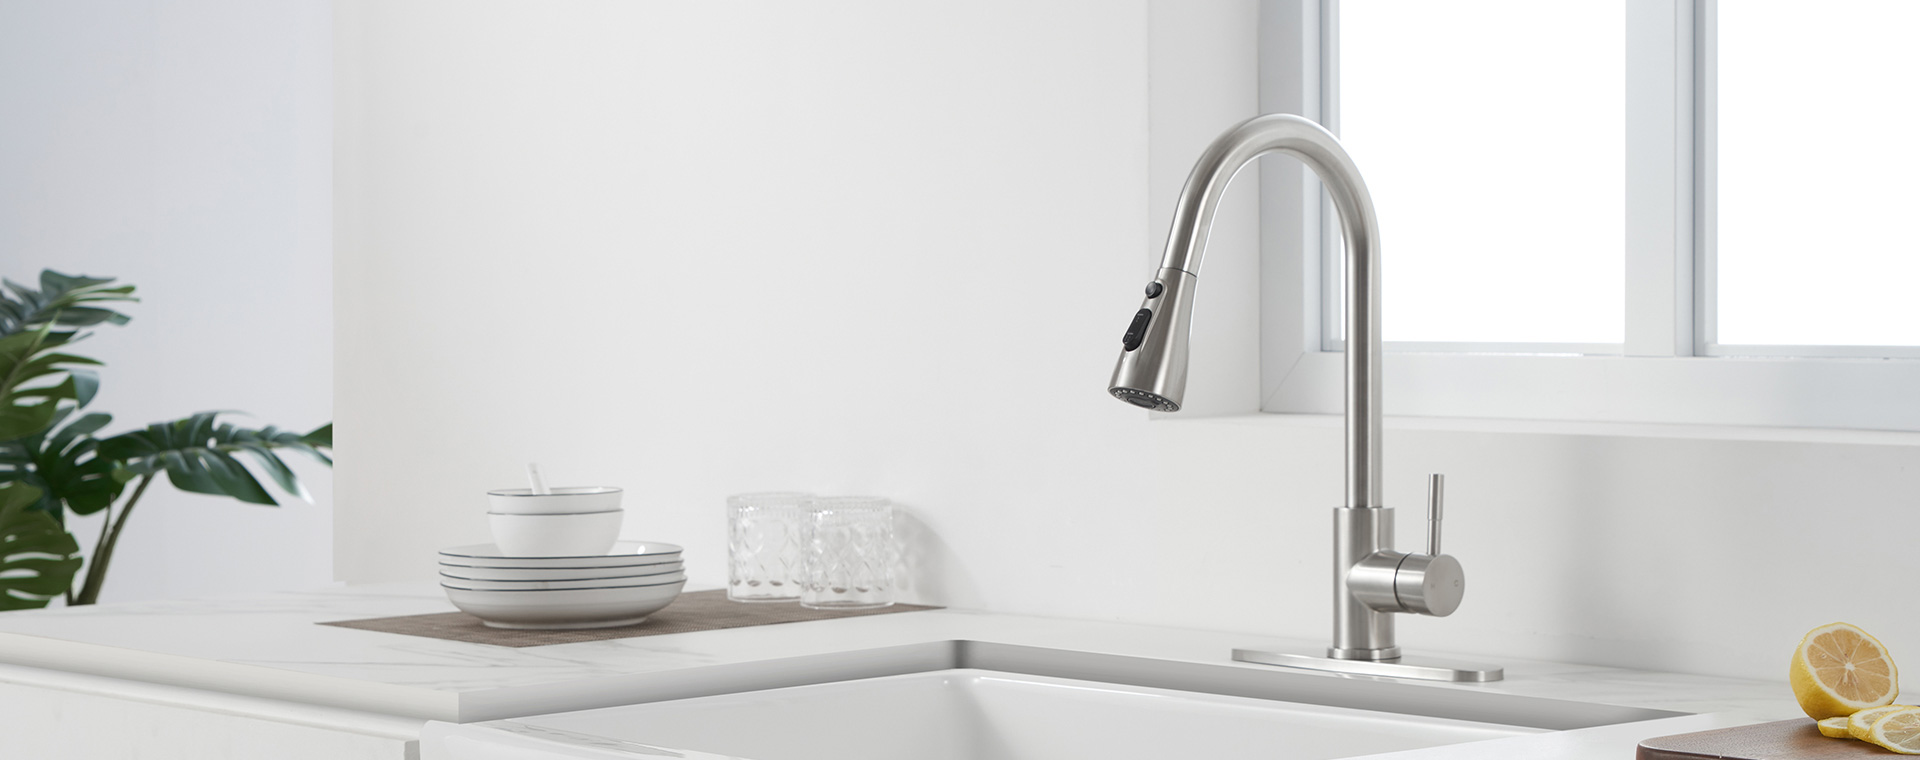 Stainless Steel Wallmount Faucet